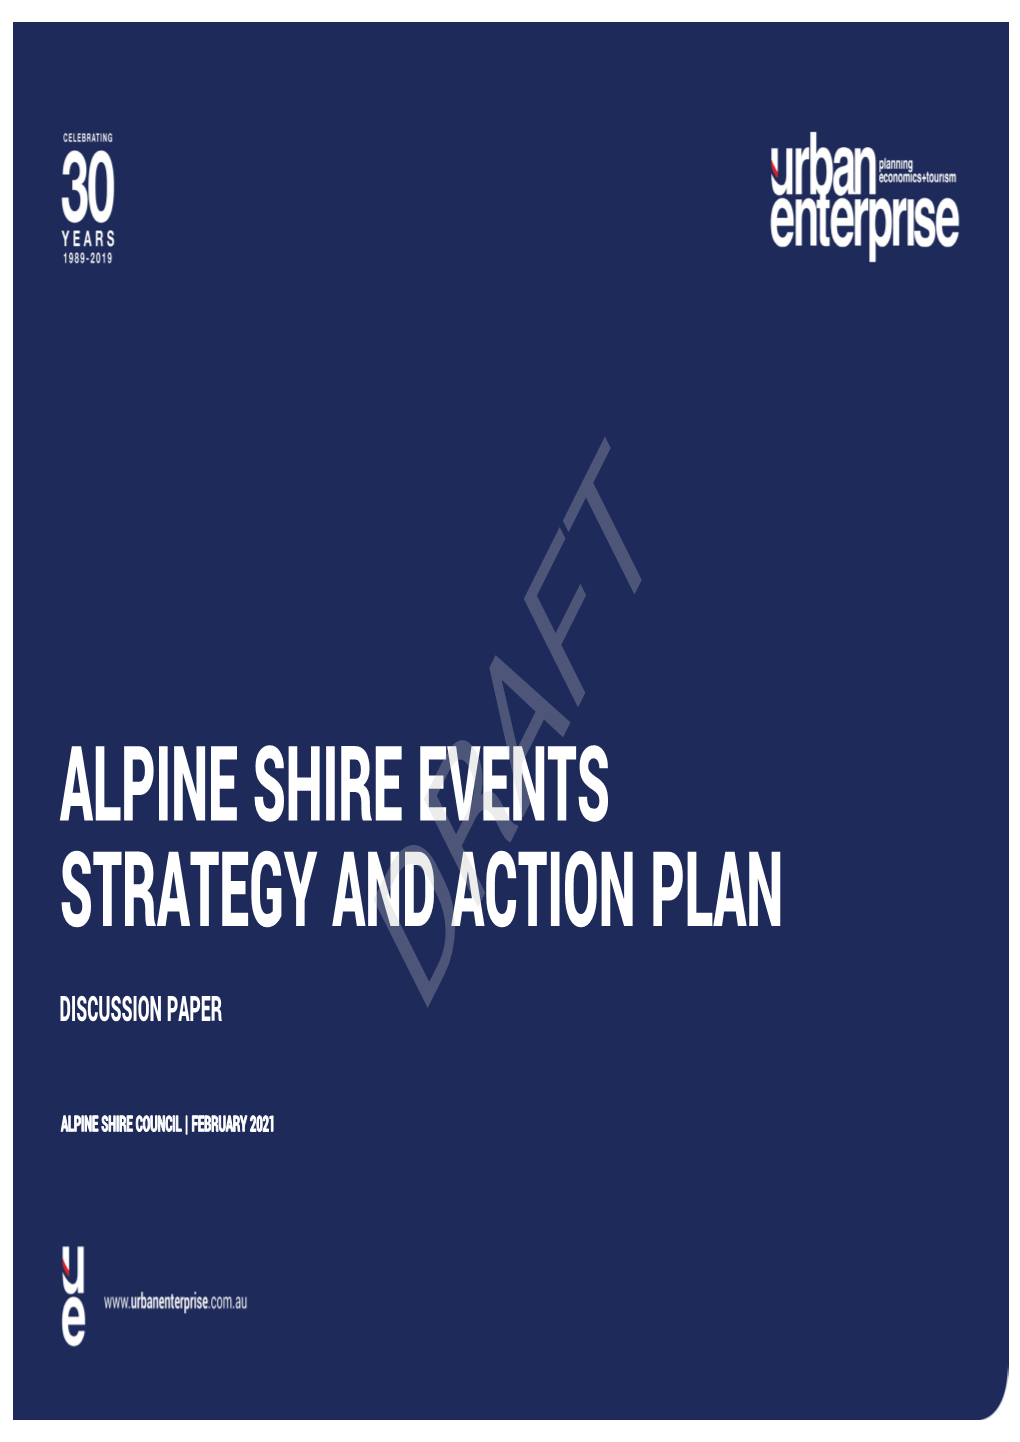 Alpine Shire Events Strategy and Action Plan Discussion Paper Draft